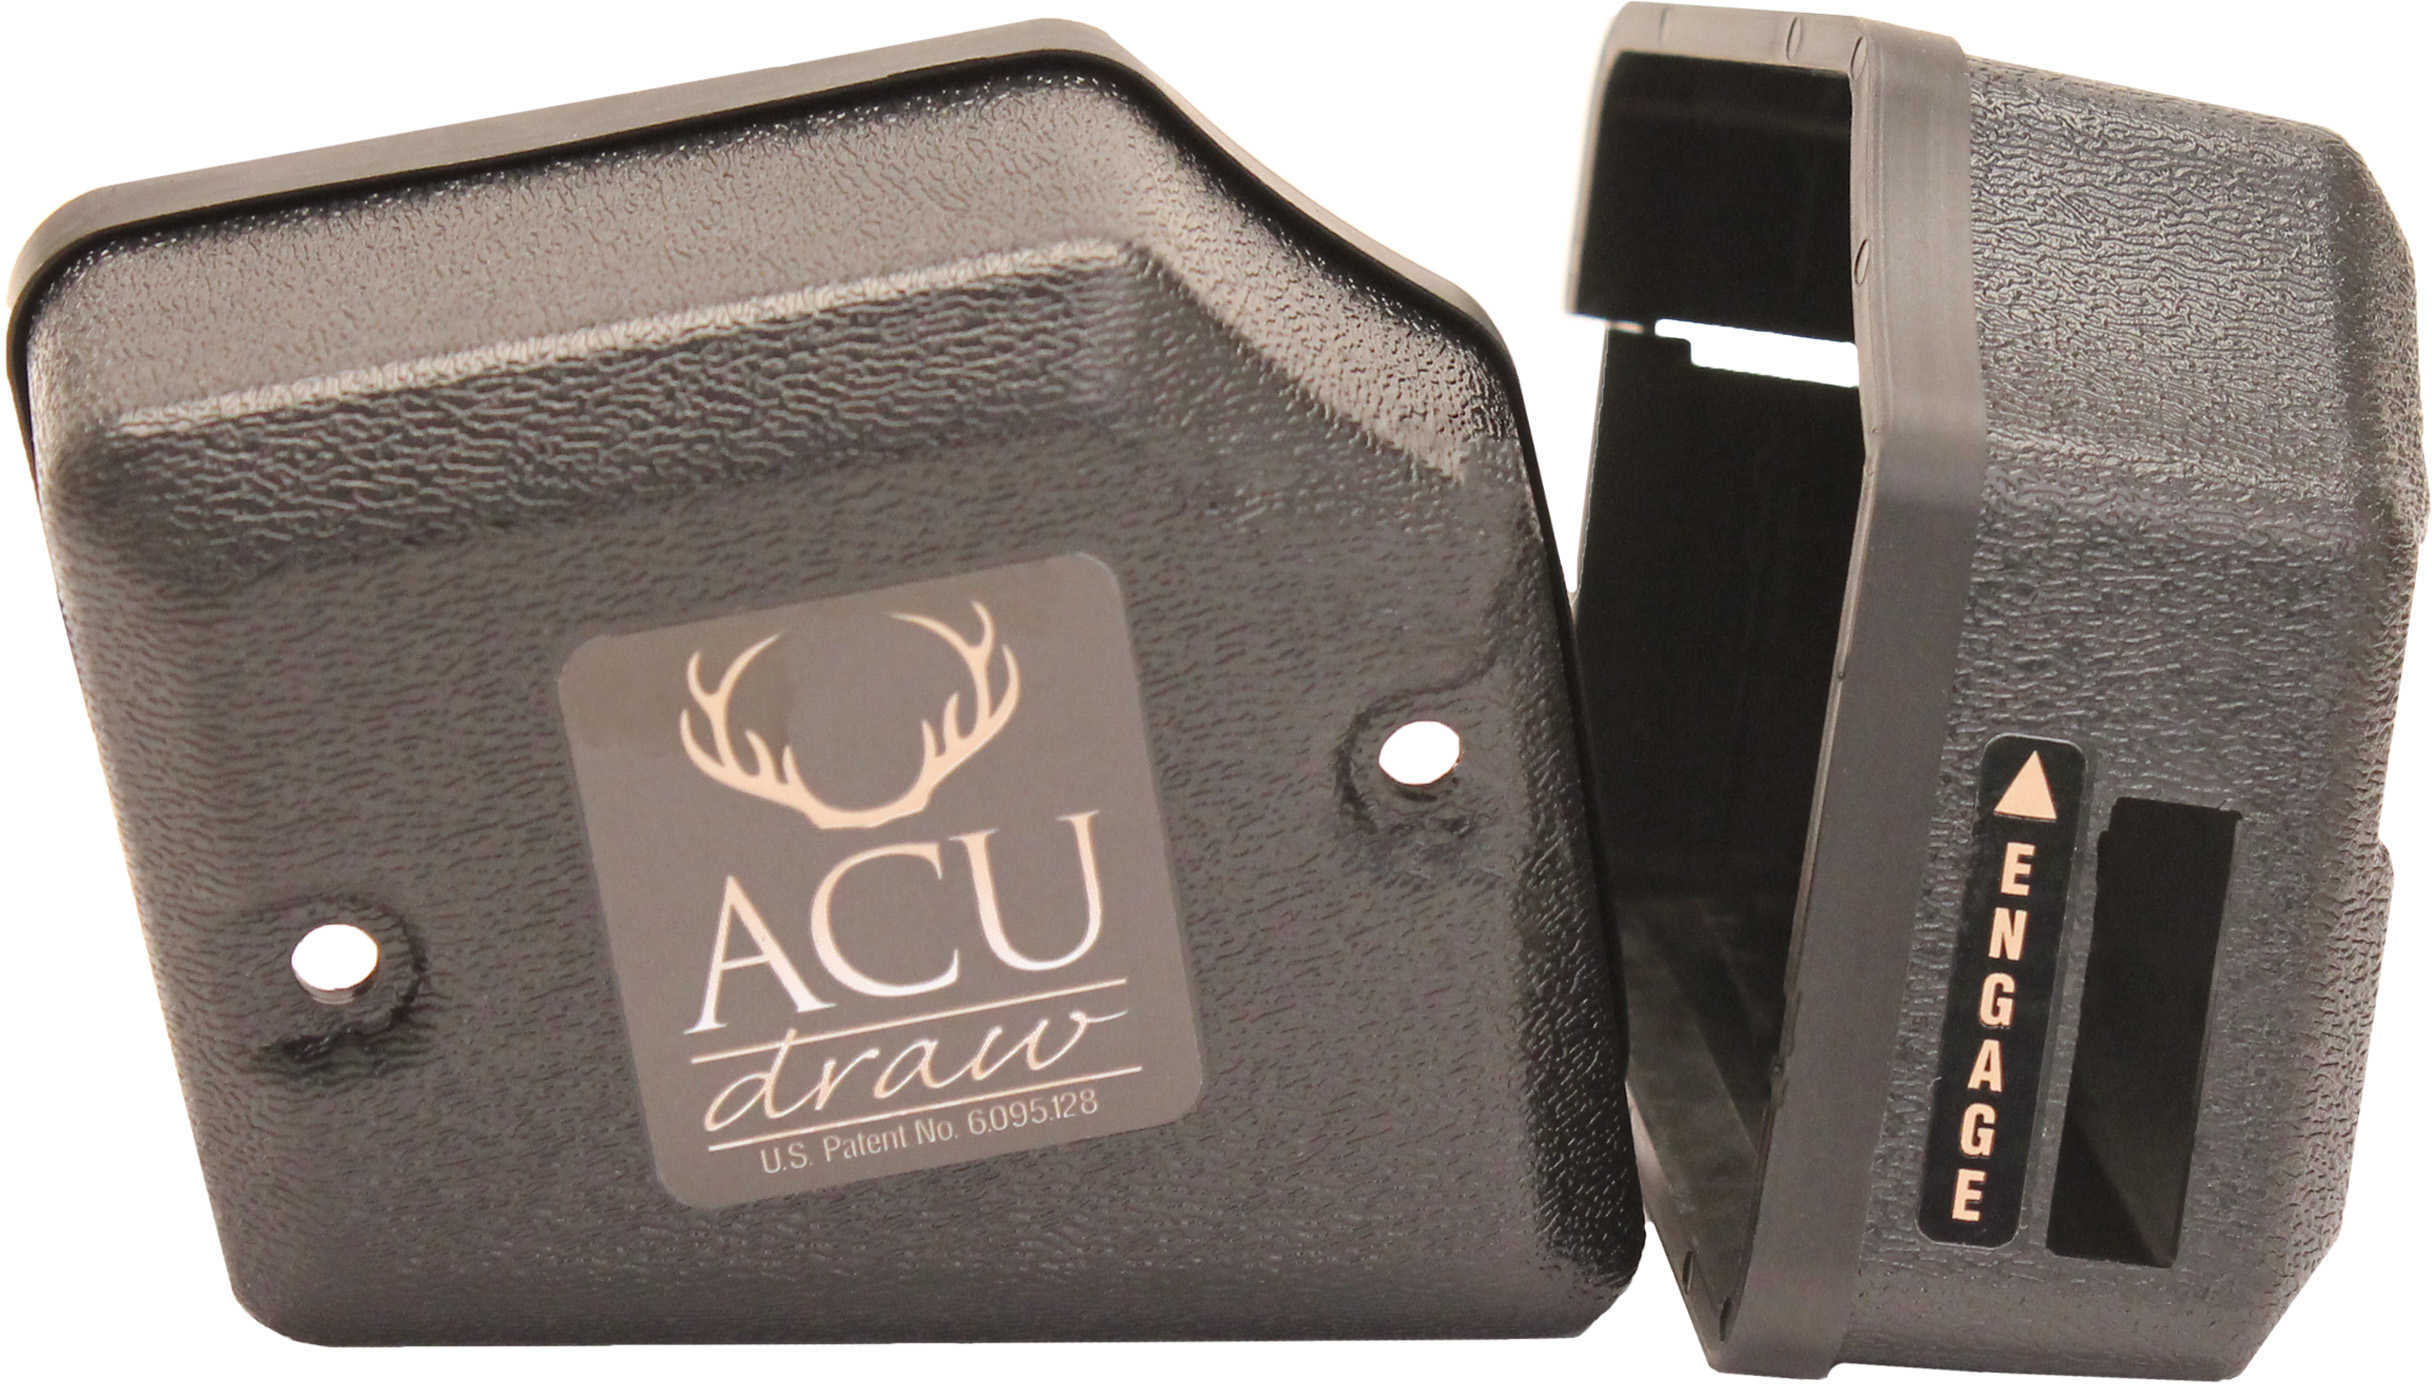 TenPoint Crossbow Technologies ACUdraw Replacement Covers, 2 Pack HCA-423